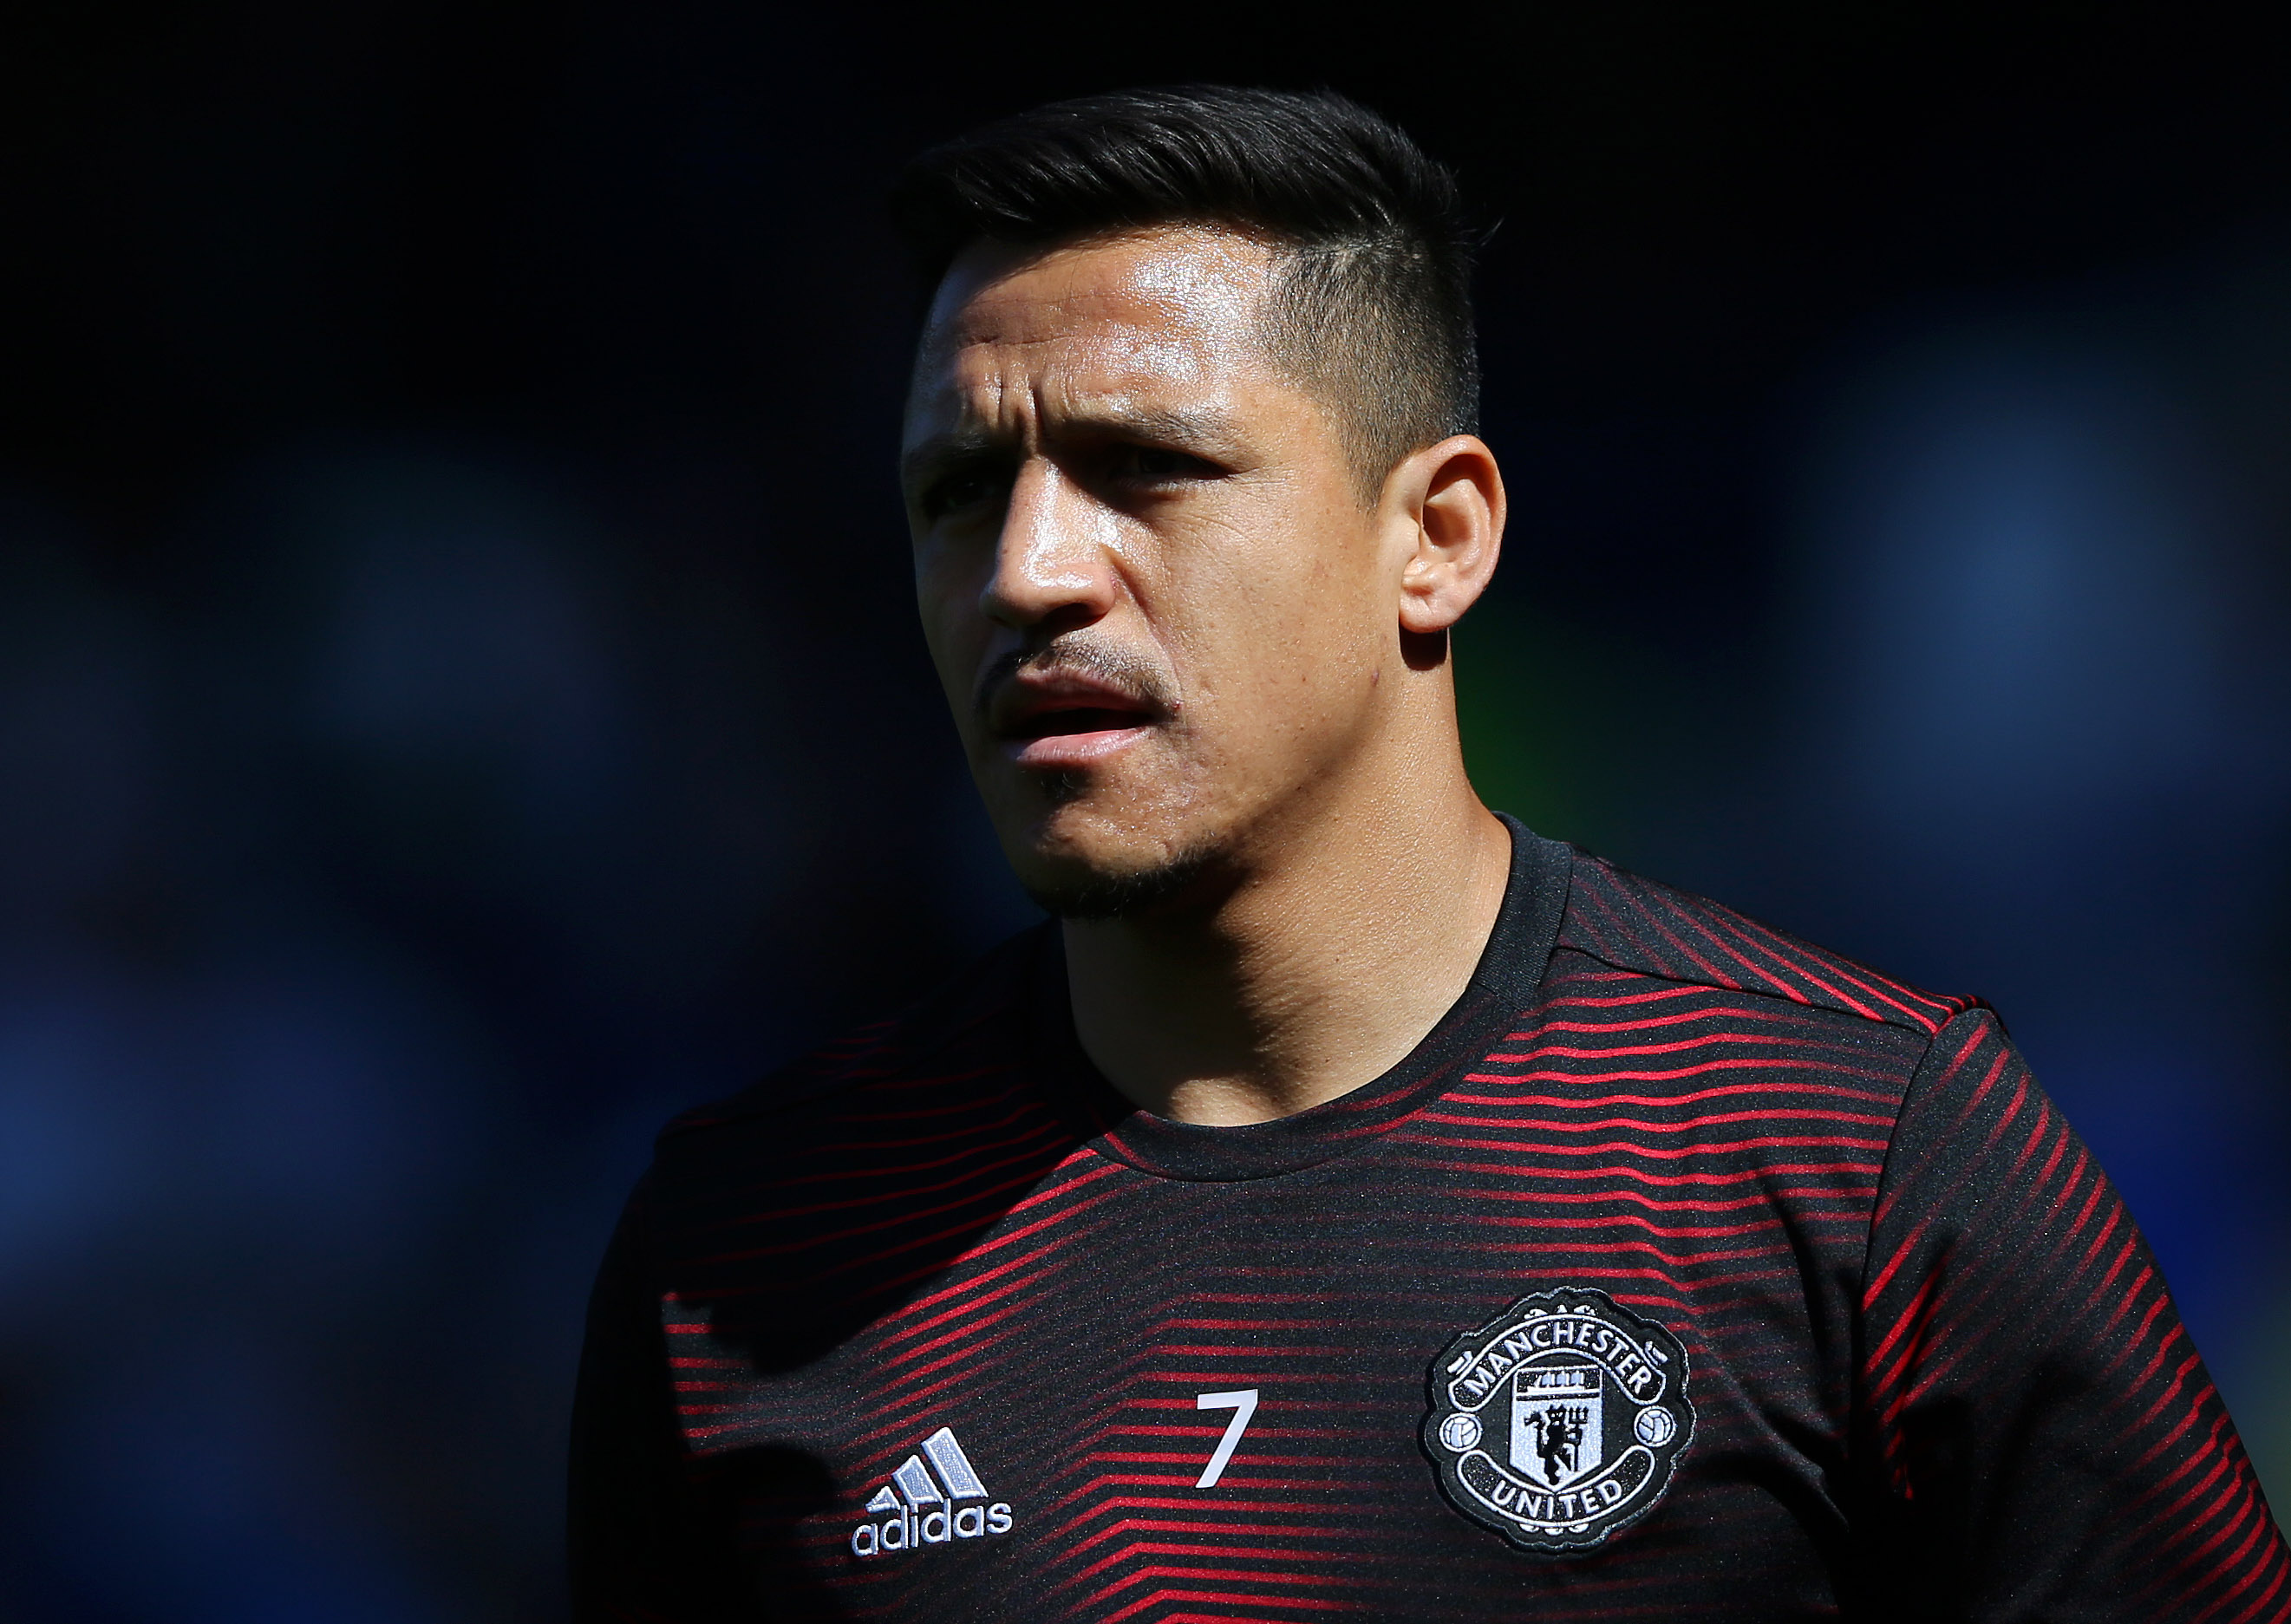 LIVERPOOL, ENGLAND - APRIL 21:  Alexis Sanchez of Manchester United warms up prior to the Premier League match between Everton FC and Manchester United at Goodison Park on April 21, 2019 in Liverpool, United Kingdom. (Photo by Alex Livesey/Getty Images)